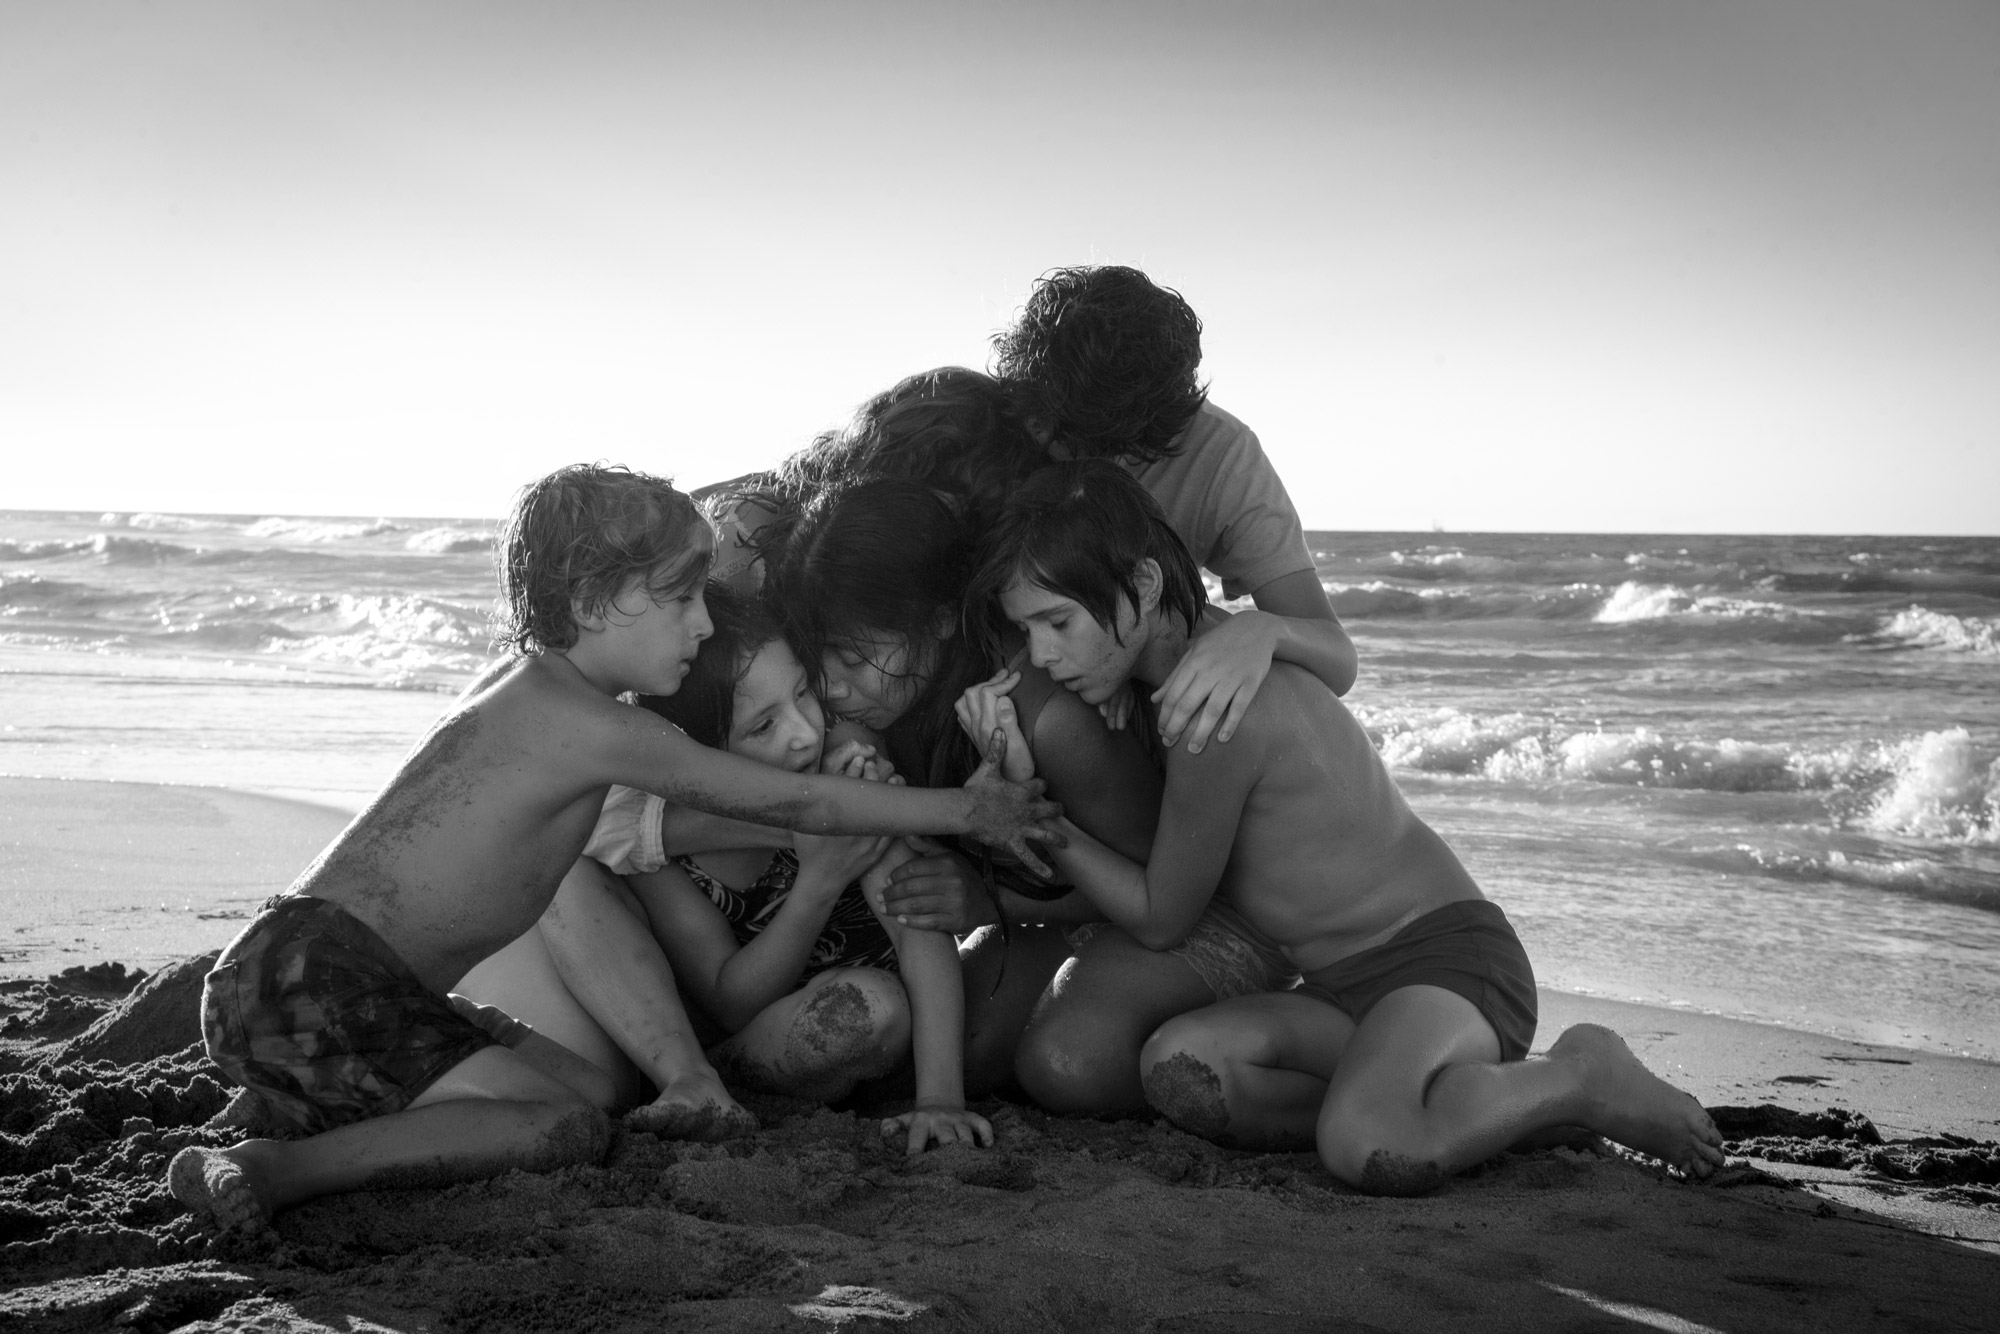 Light stories: Roma, by Alfonso Cuarón